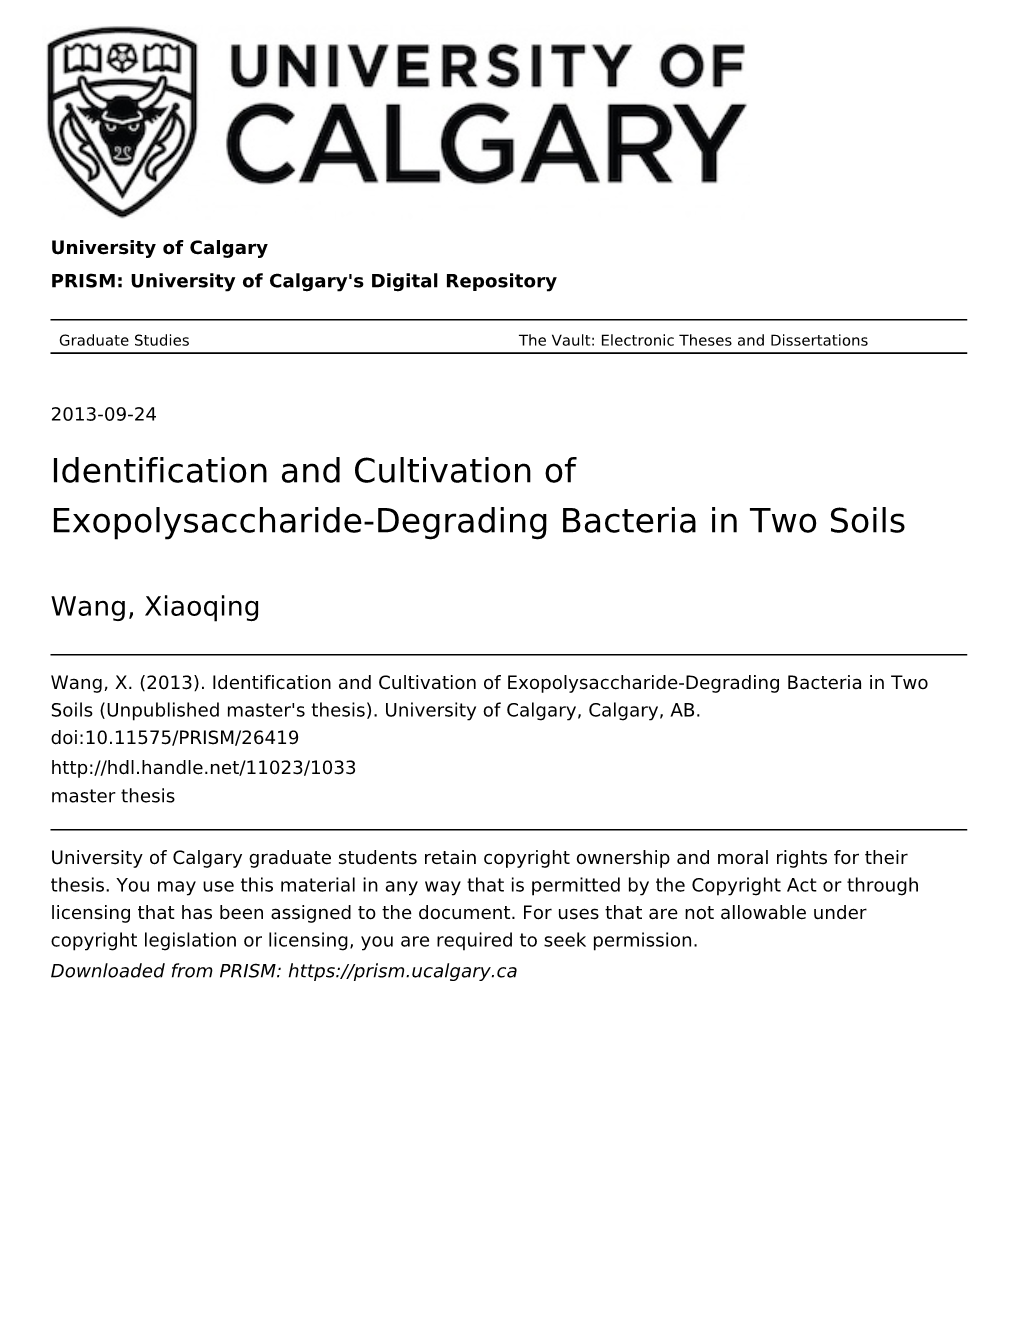 Identification and Cultivation of Exopolysaccharide-Degrading Bacteria in Two Soils